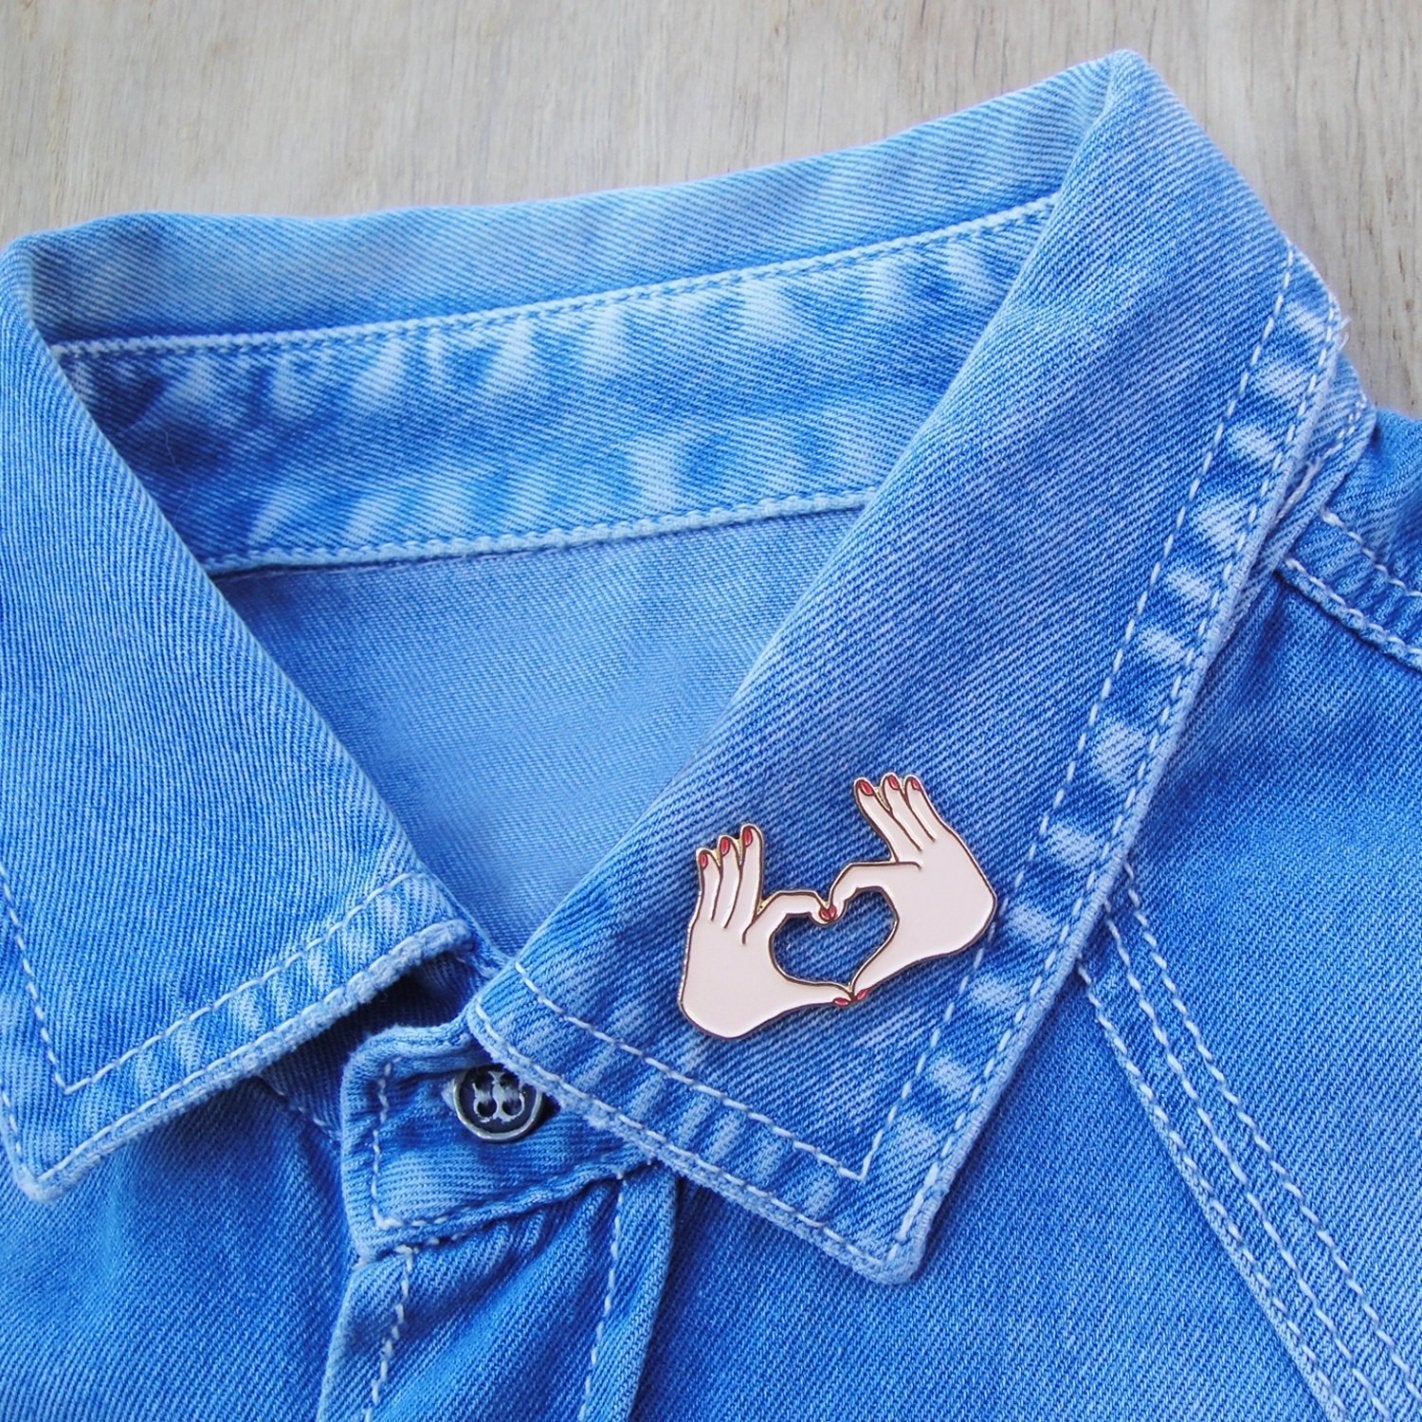 Broche d'amour